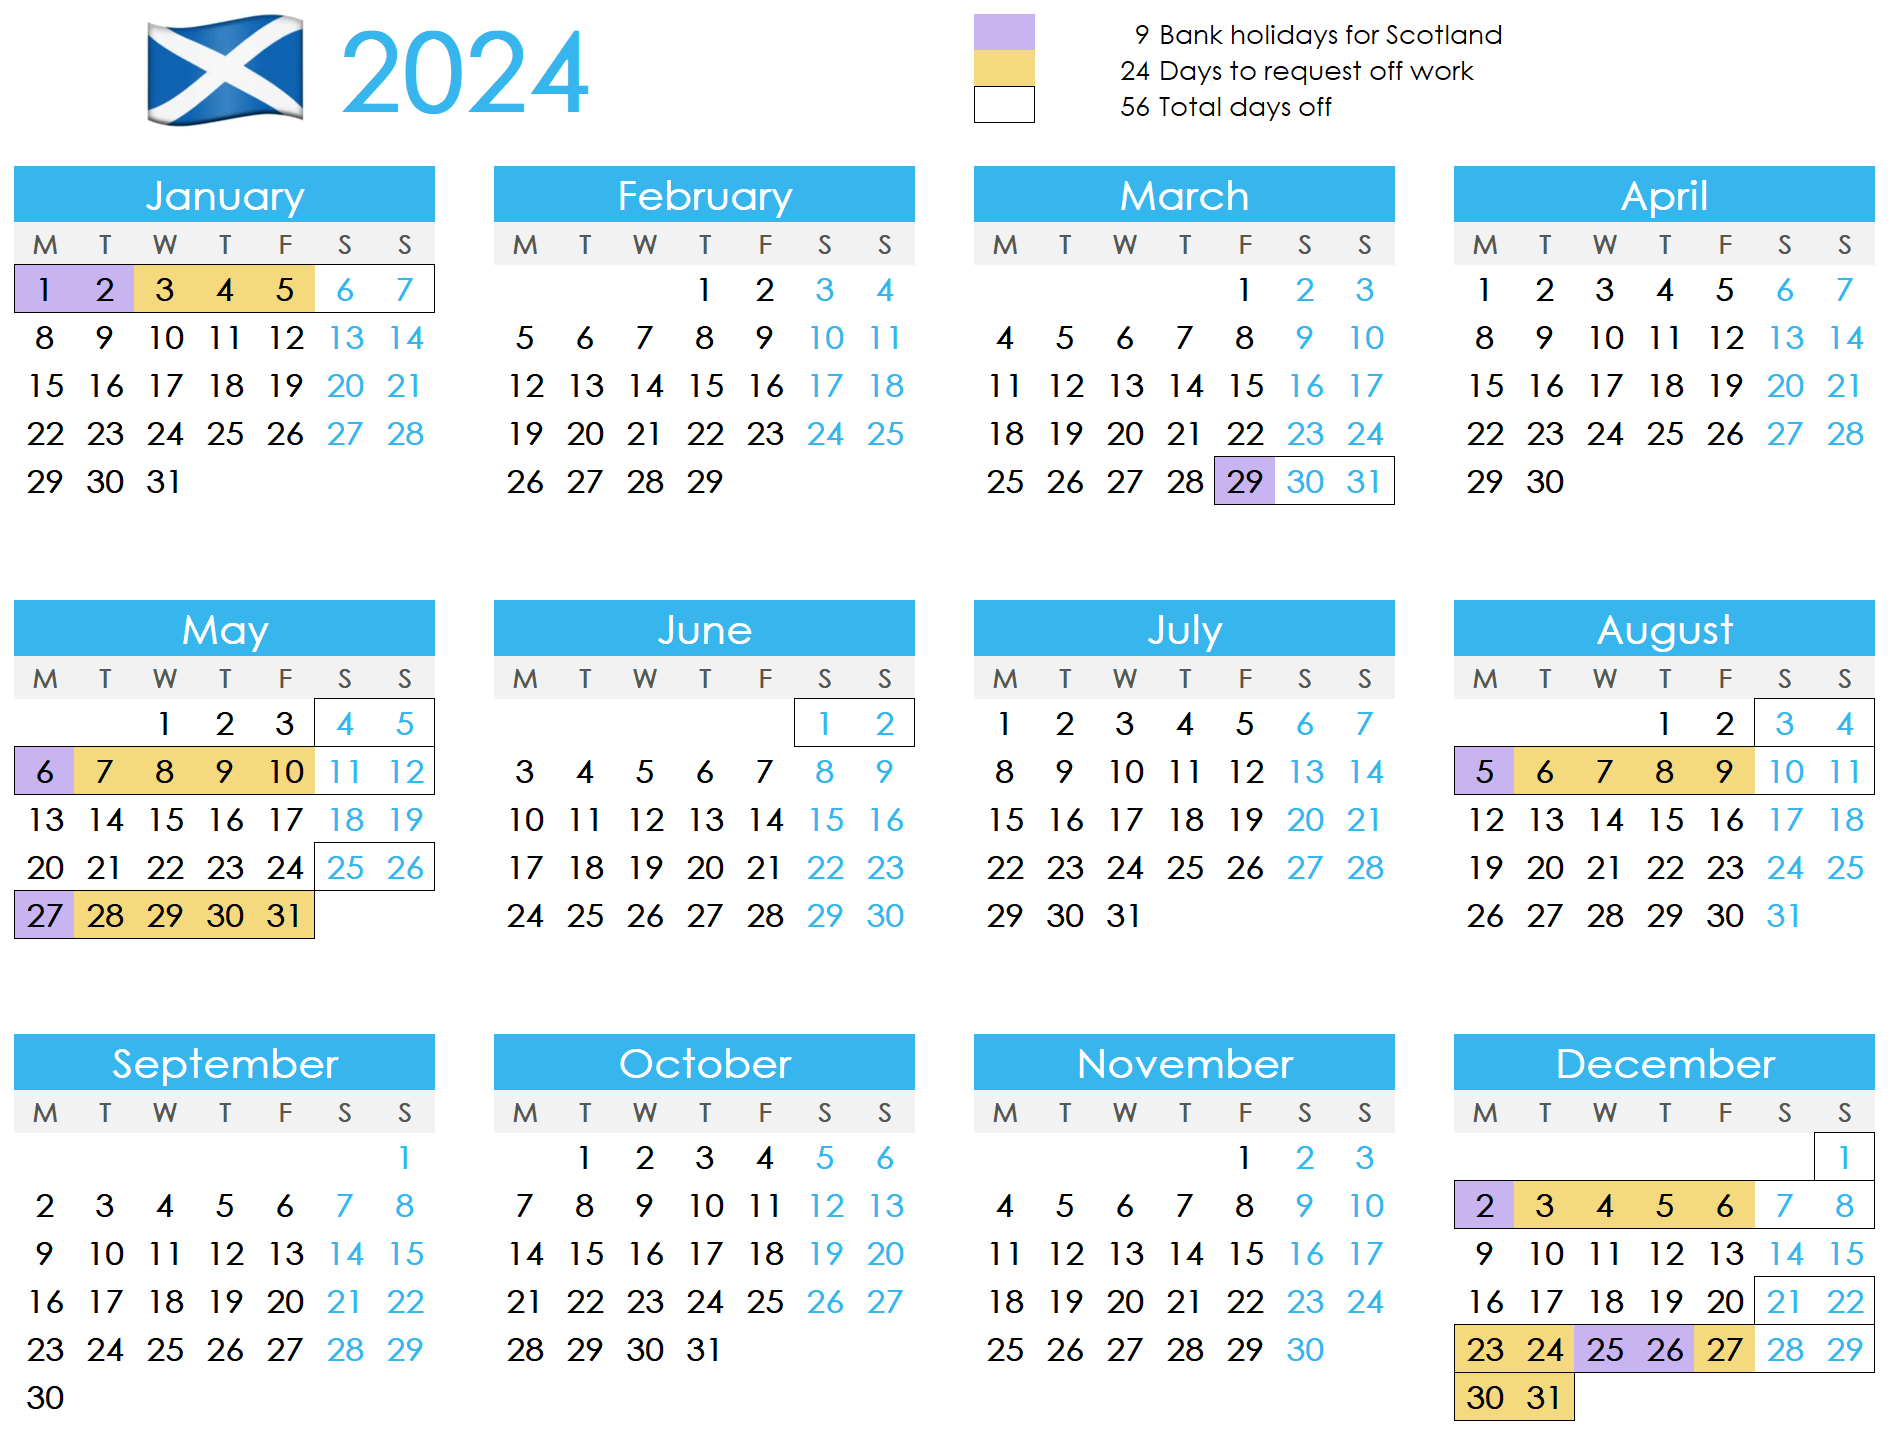 Calendar showing how to maximise annual leave in Scotland UK 2024